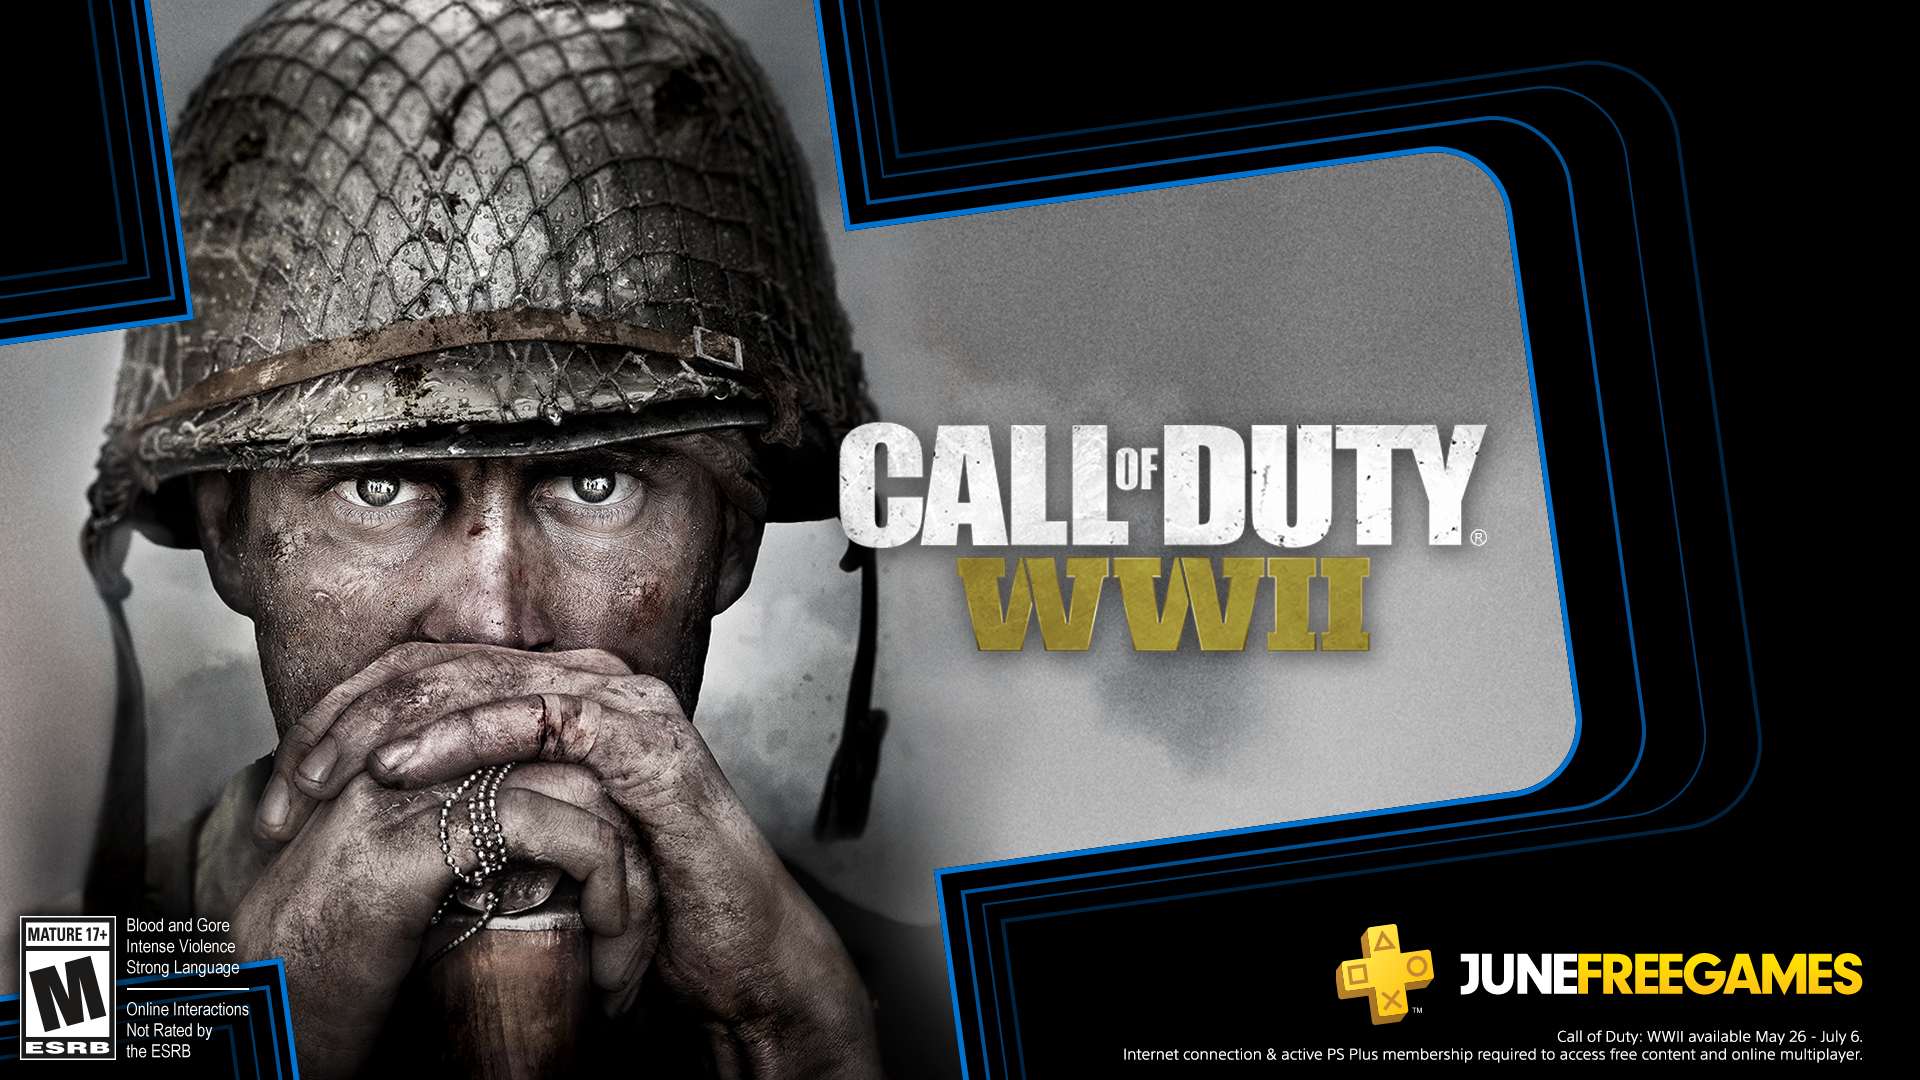 CharlieIntel on Twitter: "Breaking: Call Duty: WWII will be FREE with PlayStation Plus on PS4 in the June, available to download starting May 26 https://t.co/iJpB0SZOA8 / Twitter